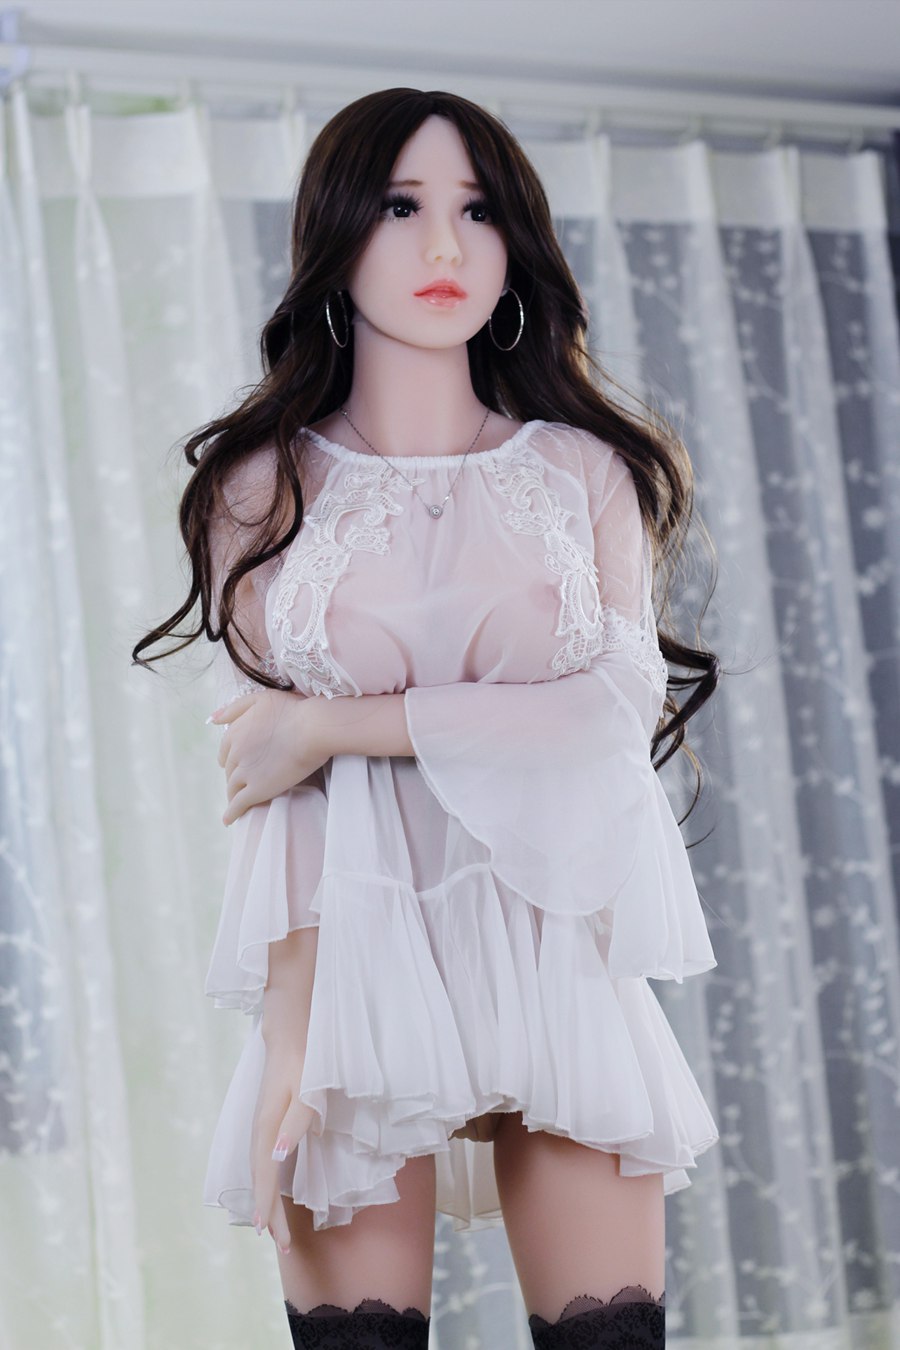 Kingmansion Faustina 140cm Big Boobs Life Size Hot Barbie Sex Toy Doll